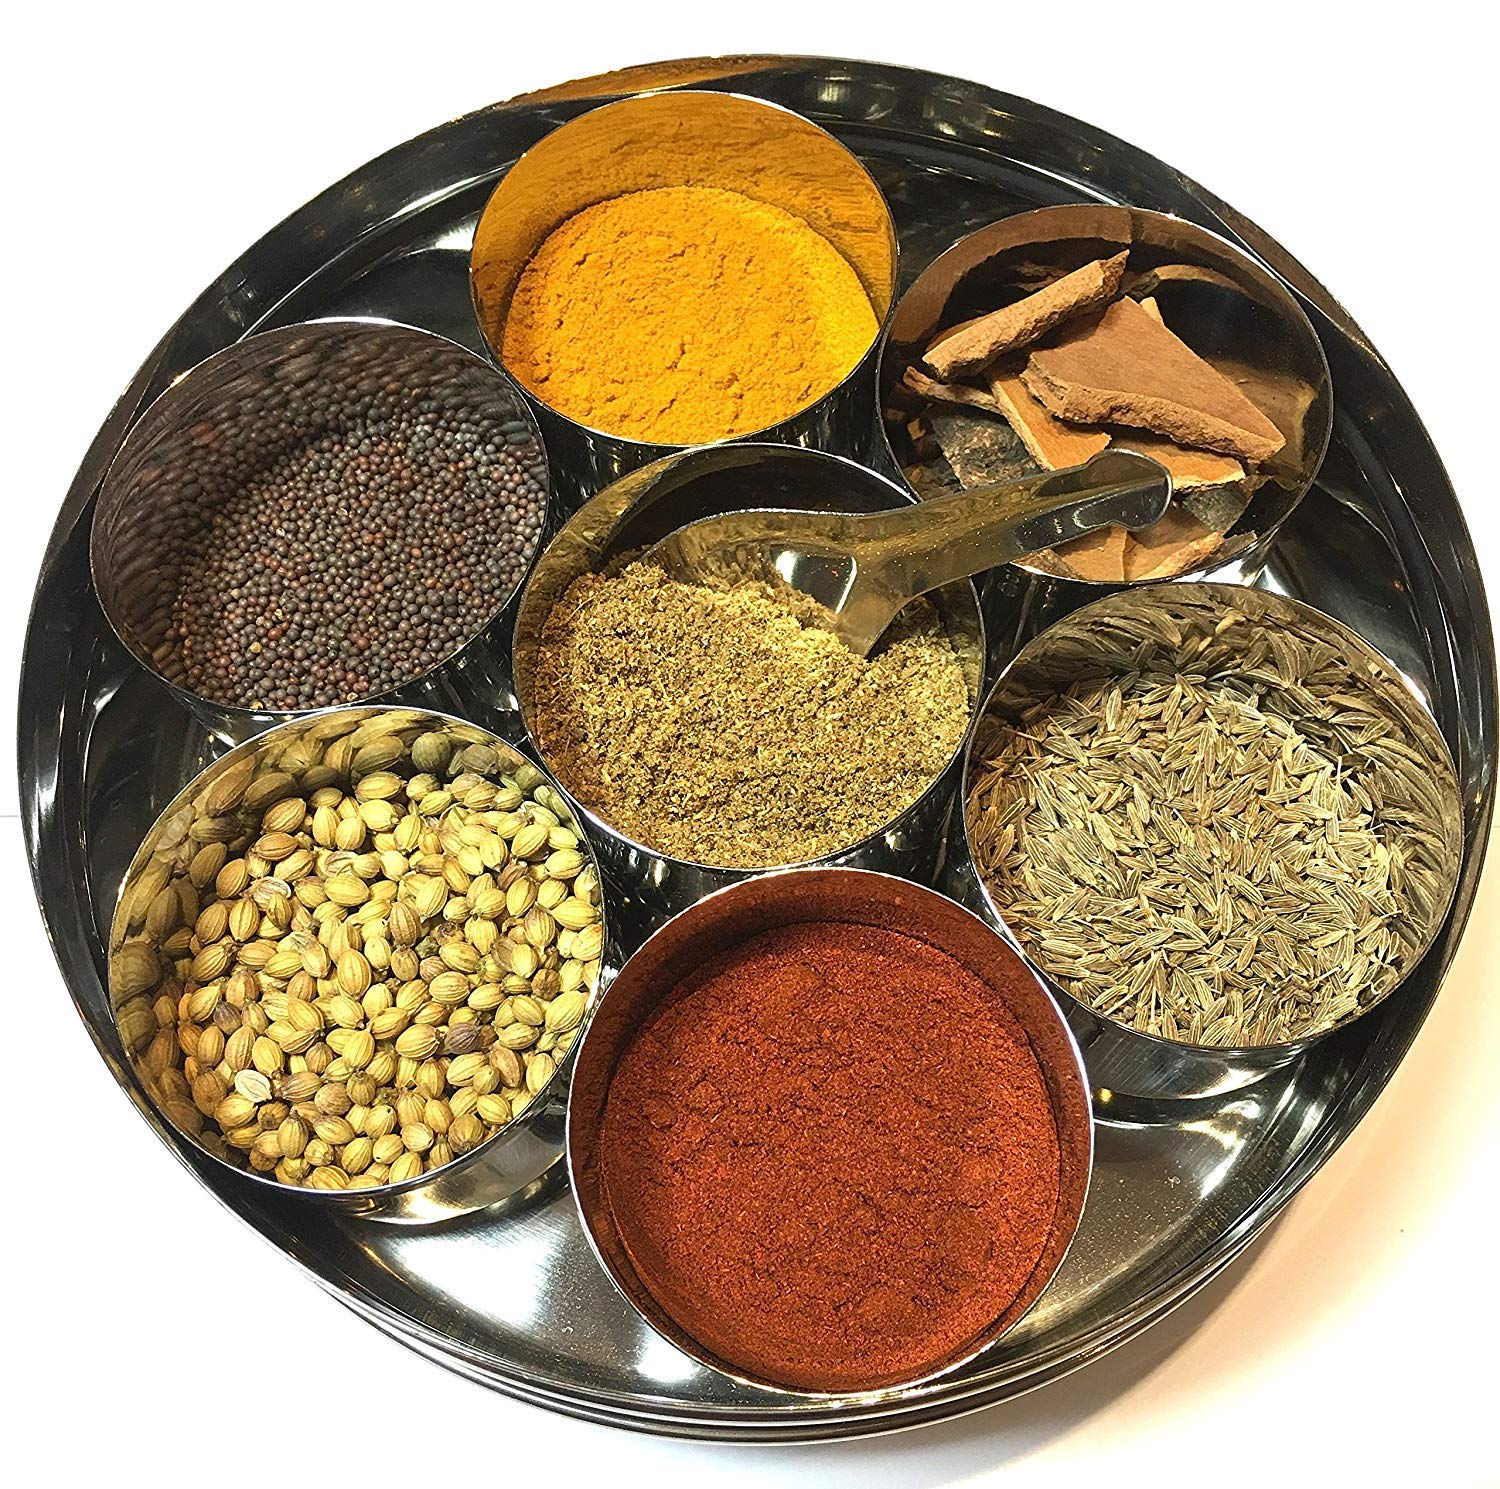 Which Spice are you?